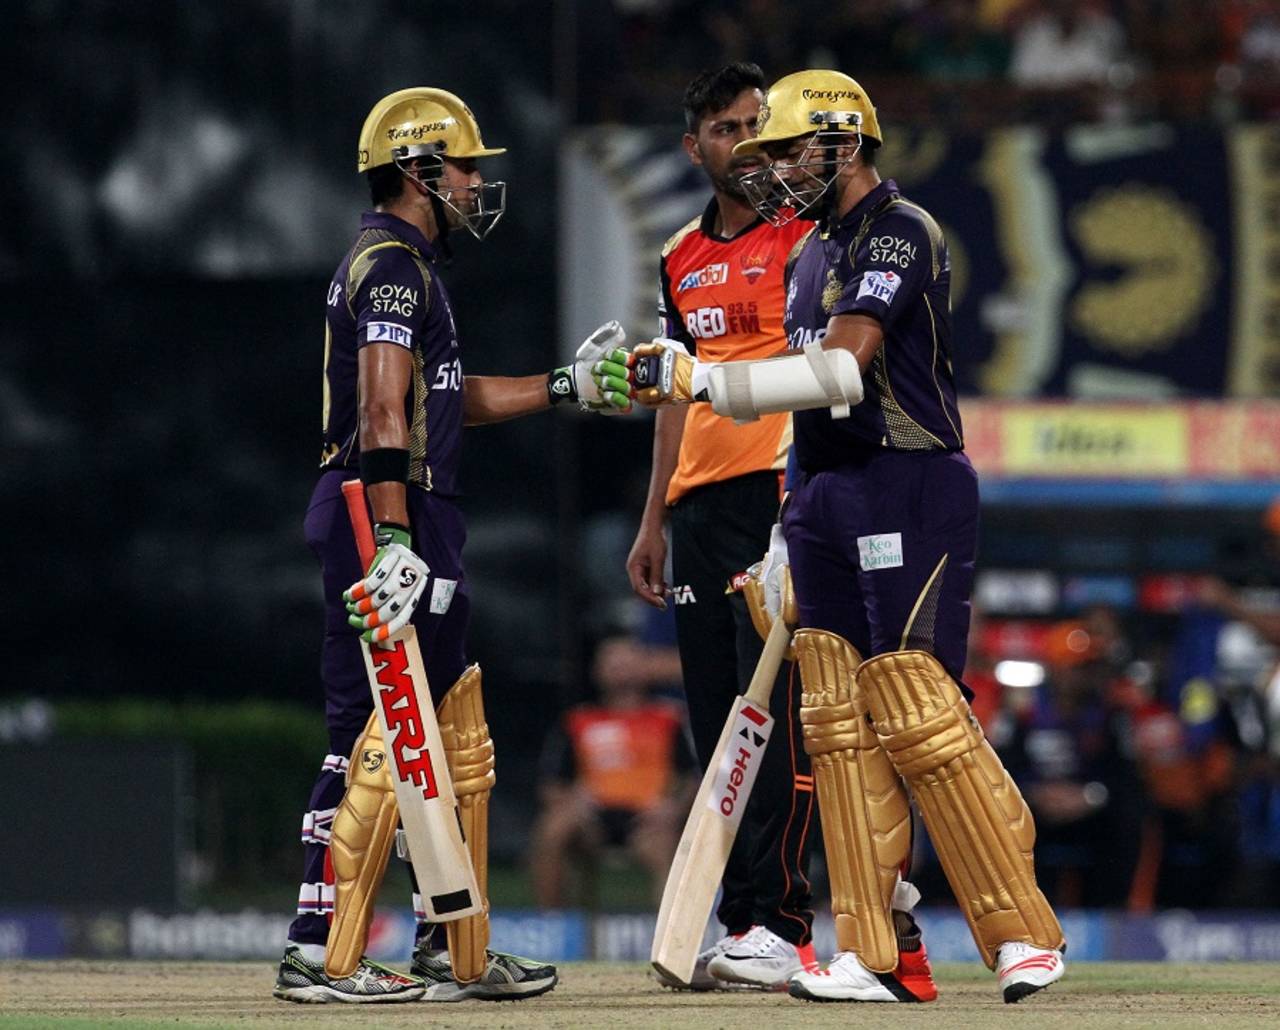 After being put in, Kolkata Knight Riders had a strong start with Gautam Gambhir and Robin Uthappa adding 57 for the first wicket&nbsp;&nbsp;&bull;&nbsp;&nbsp;BCCI